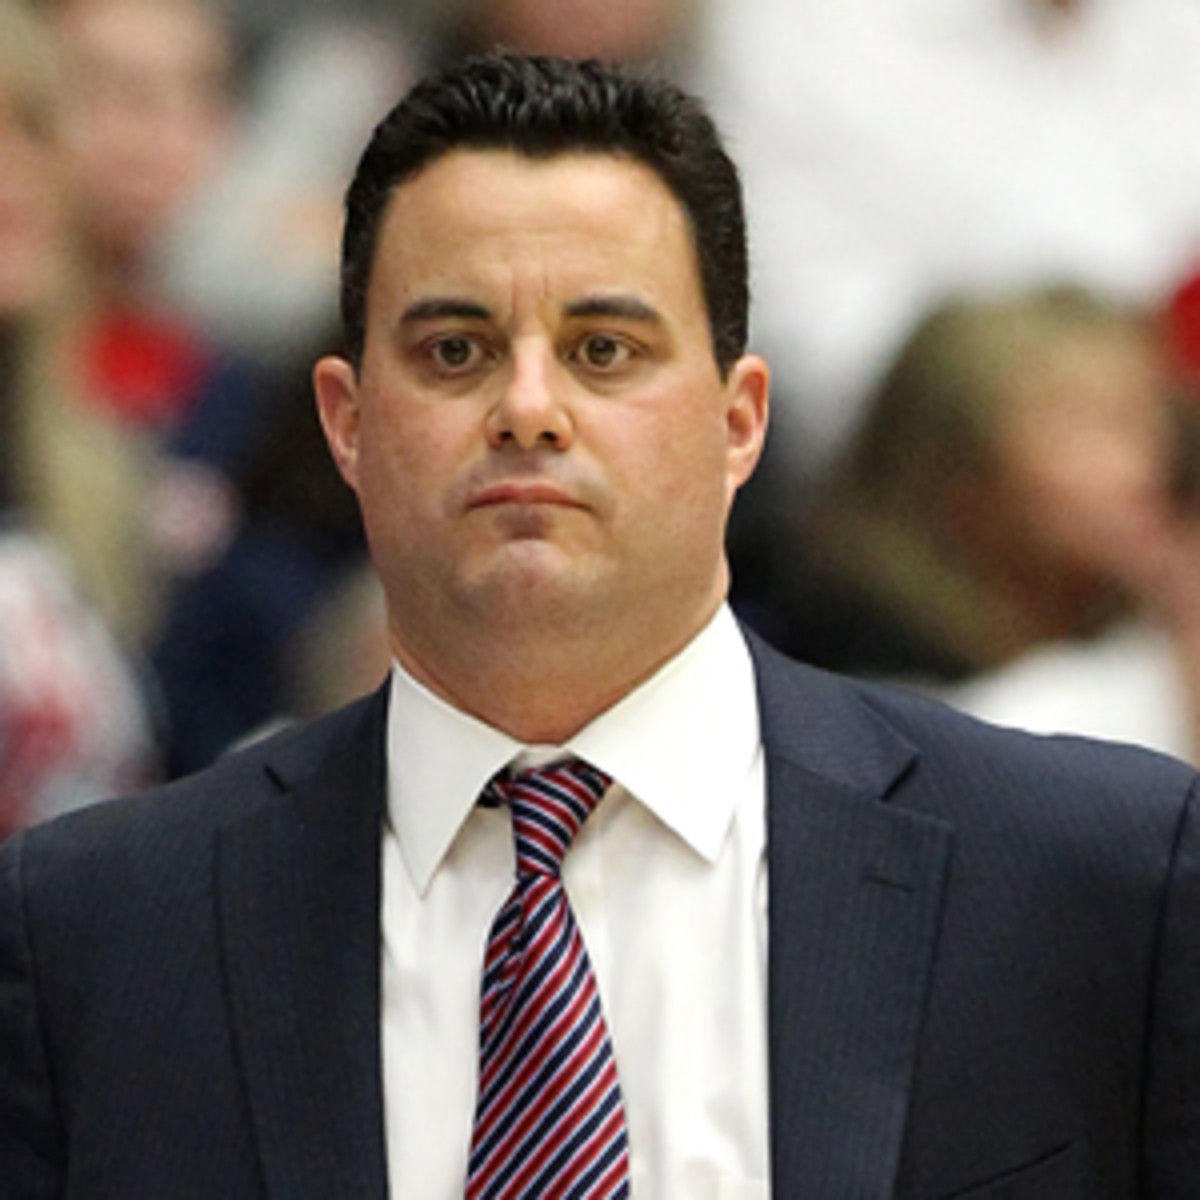 Ed Rush resigned after saying he told Pac-12 officials he would reward them for giving Arizona coach Sean Miller a technical foul. (Christian Petersen/Getty Images)